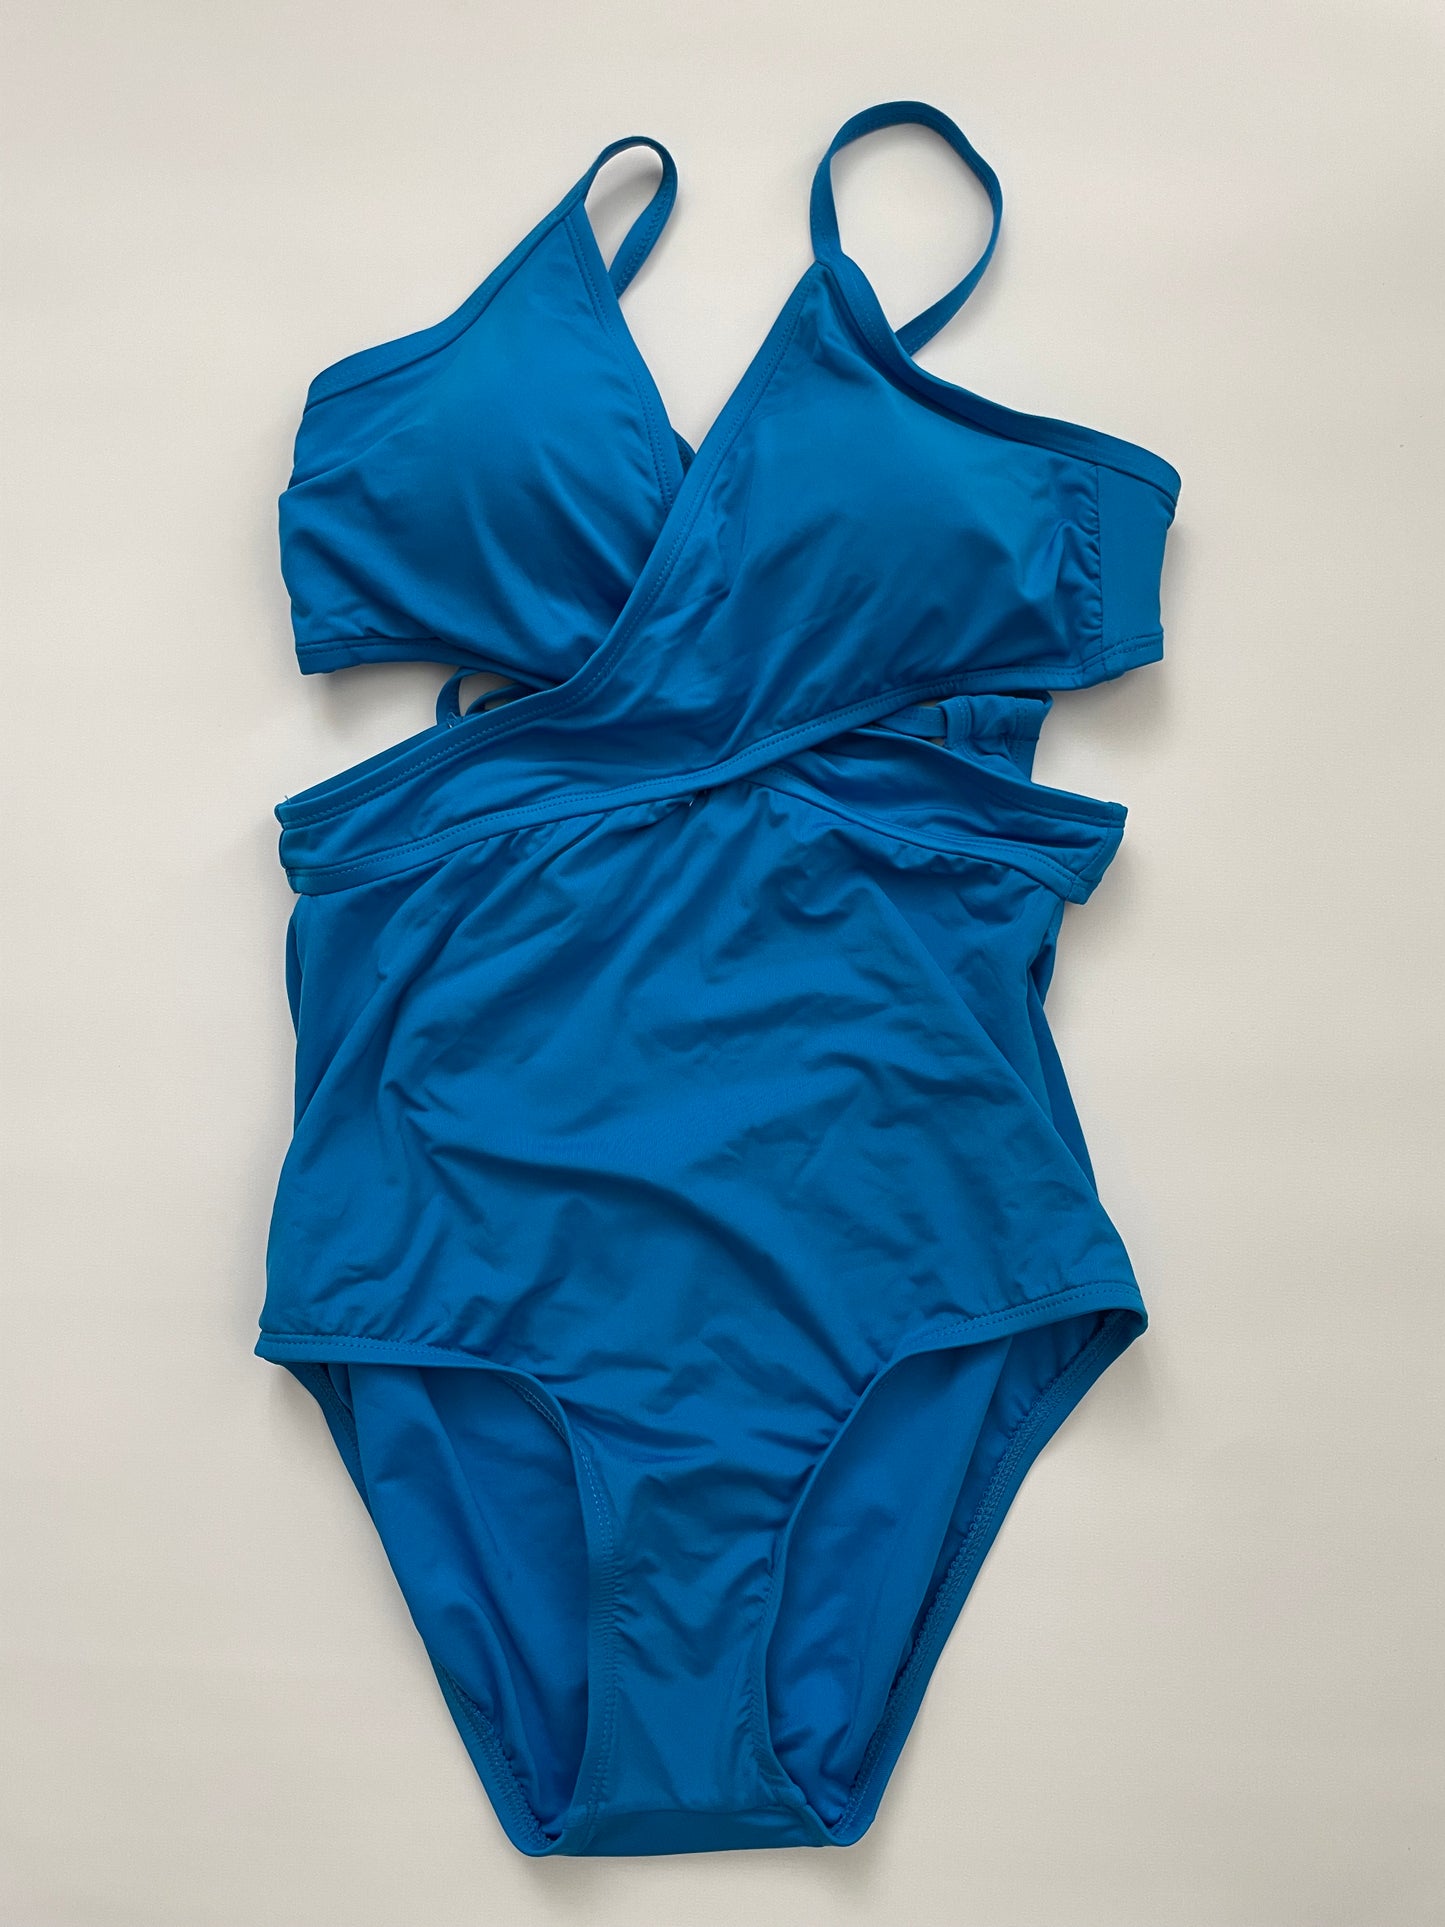 Laundry One Piece Swimsuit, NWT, M